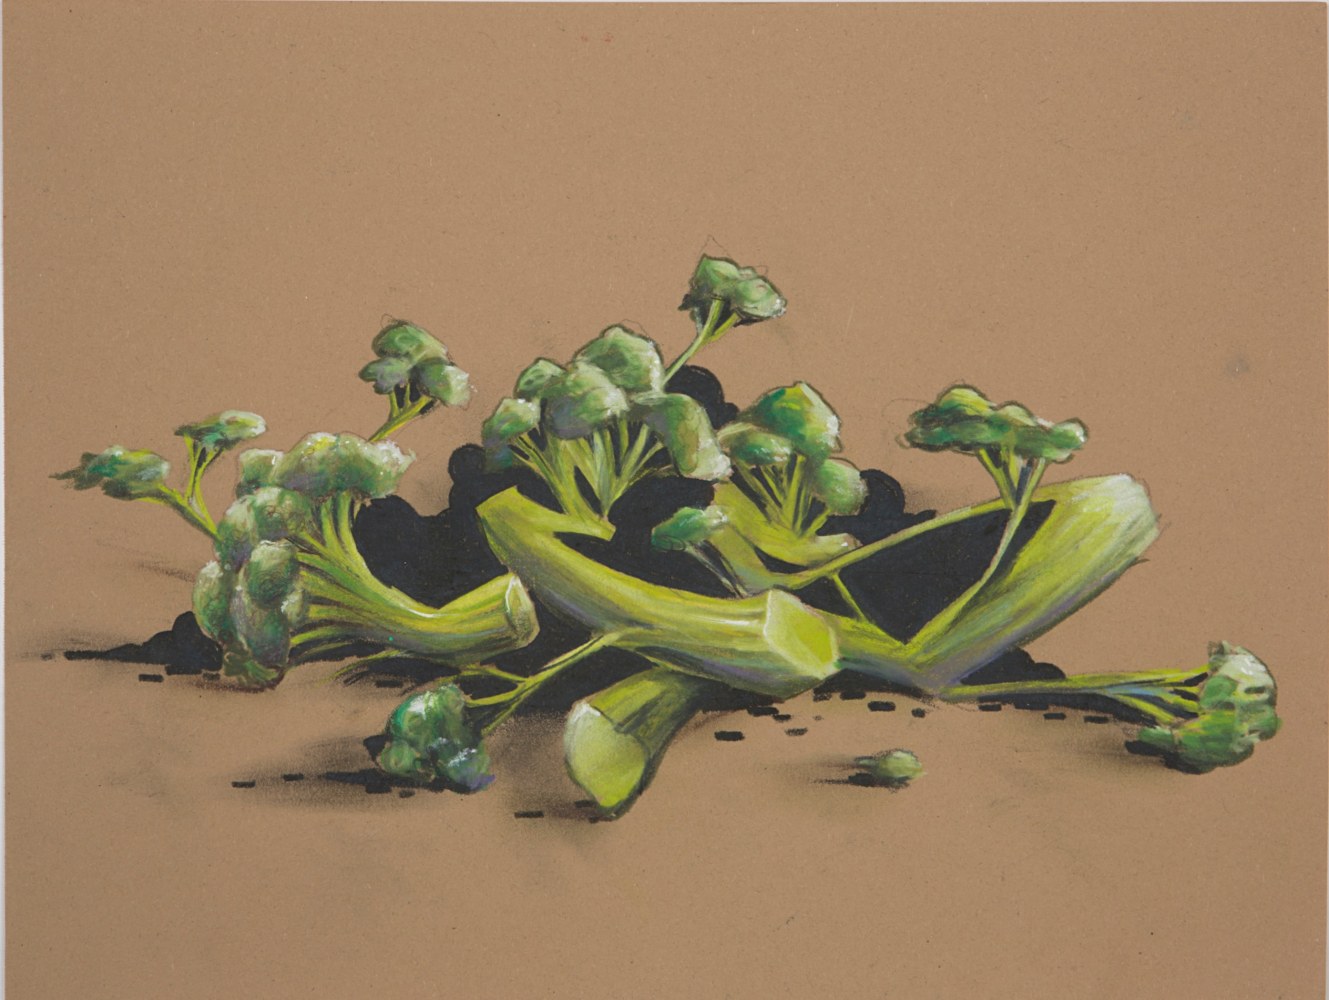 Untitled (Broccoli), 2015
Ink on paper
11 x 14 Inches